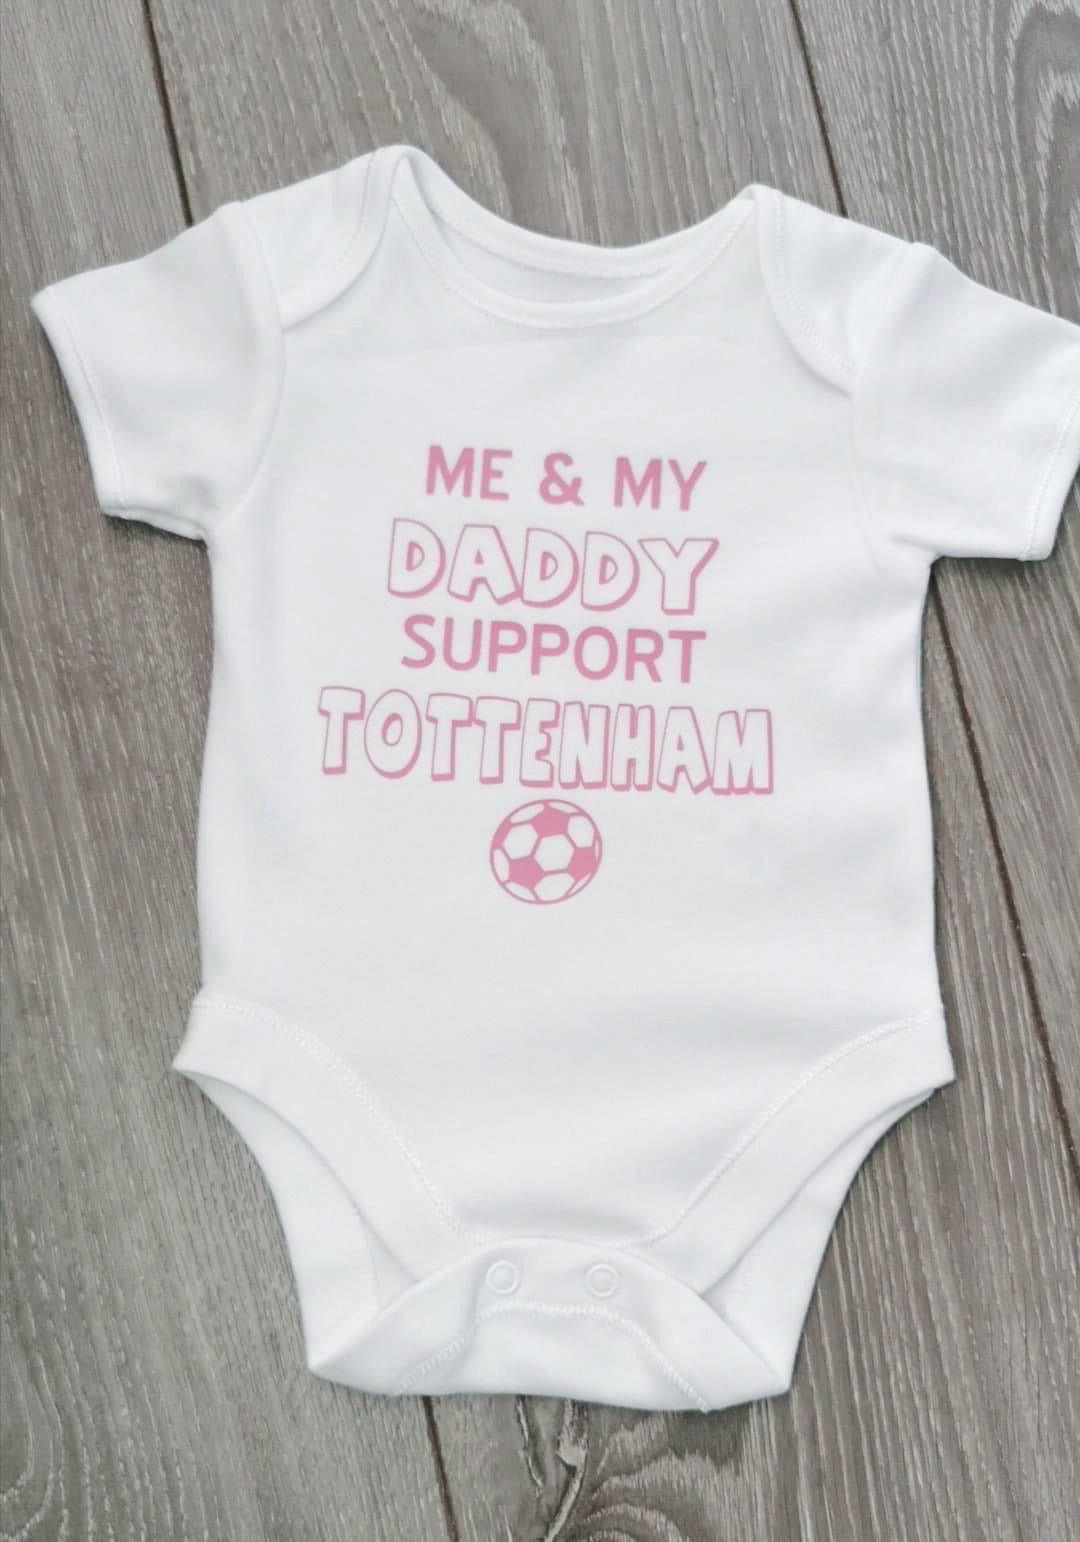 Me & My Daddy Support Football Design - Bodysuit, Vest - Add Bib for only £4.00 more